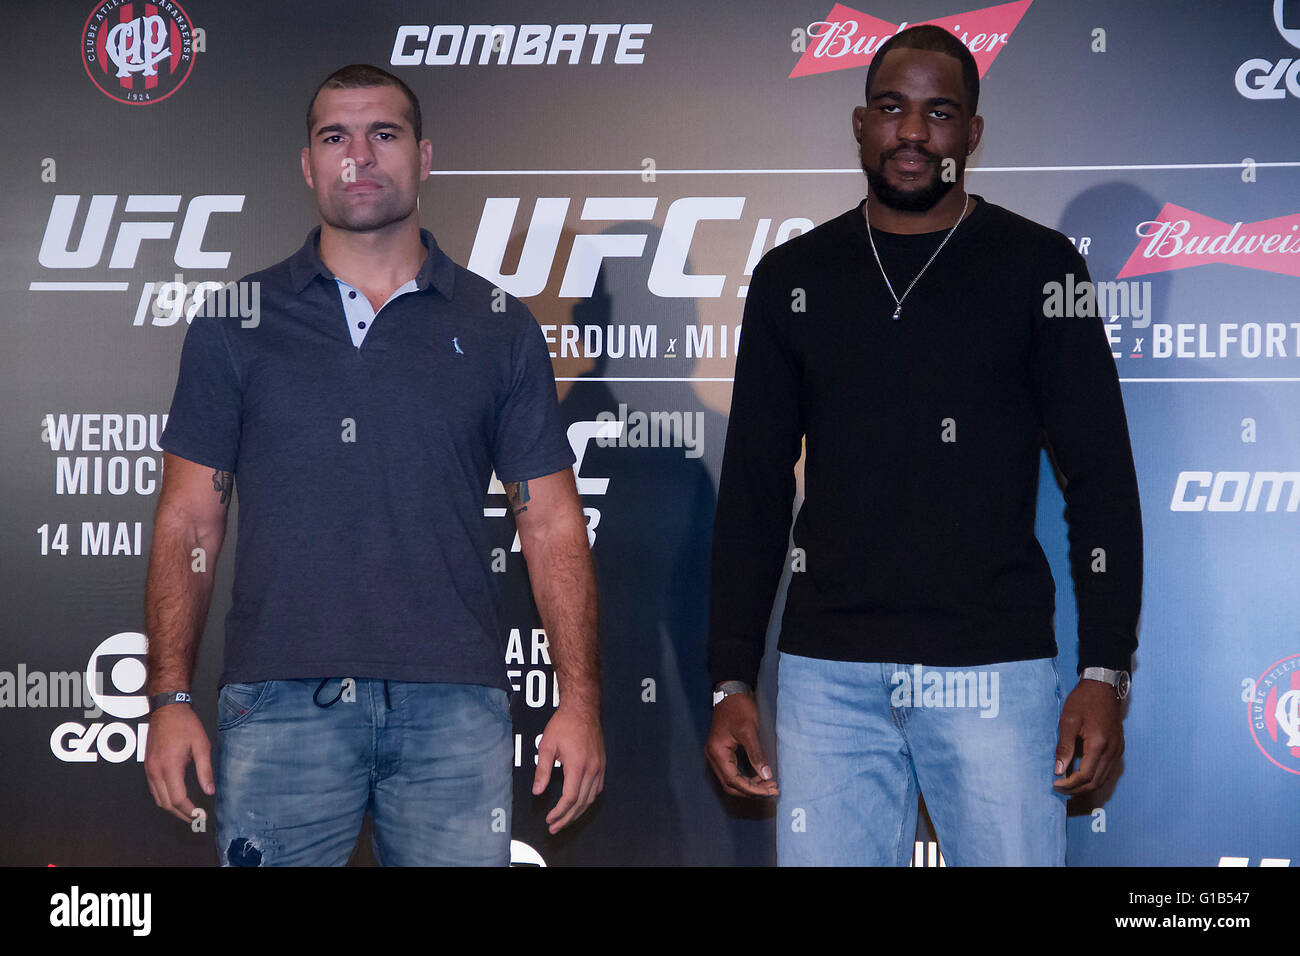 CURITIBA, PR - 12/05/2016: UFC 198 in Curitiba. The Brazilian Mauricio Rua, Shogun, and American Corey Anderson, face off on May 14, Saturday in the middle heavyweight division. With two days to the fights, UFC athletes gave interviews and posed for pictures. (Photo: William Artigas / FotoArena) Stock Photo